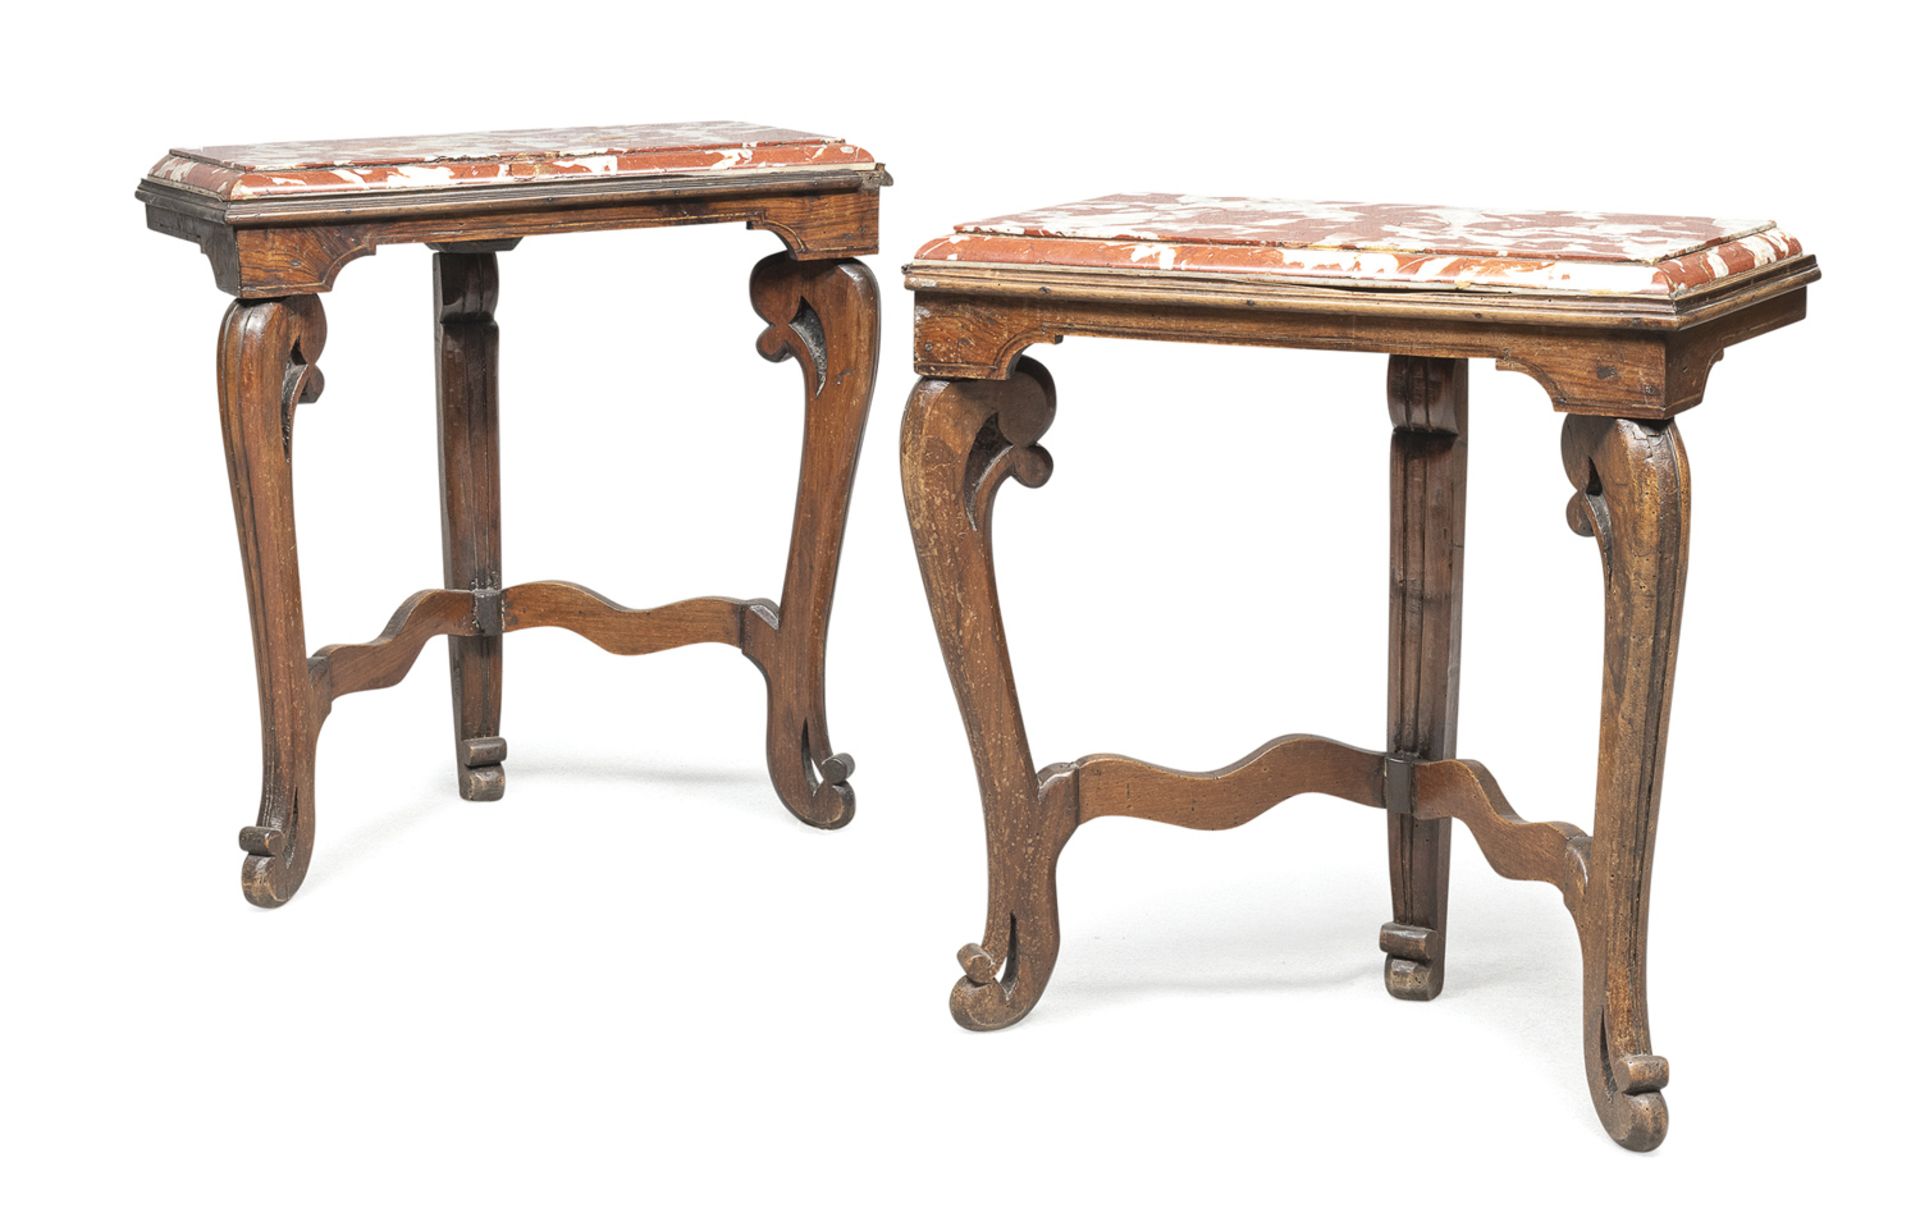 PAIR OF SMALL WALNUT CONSOLES NORTHERN ITALY 18th CENTURY